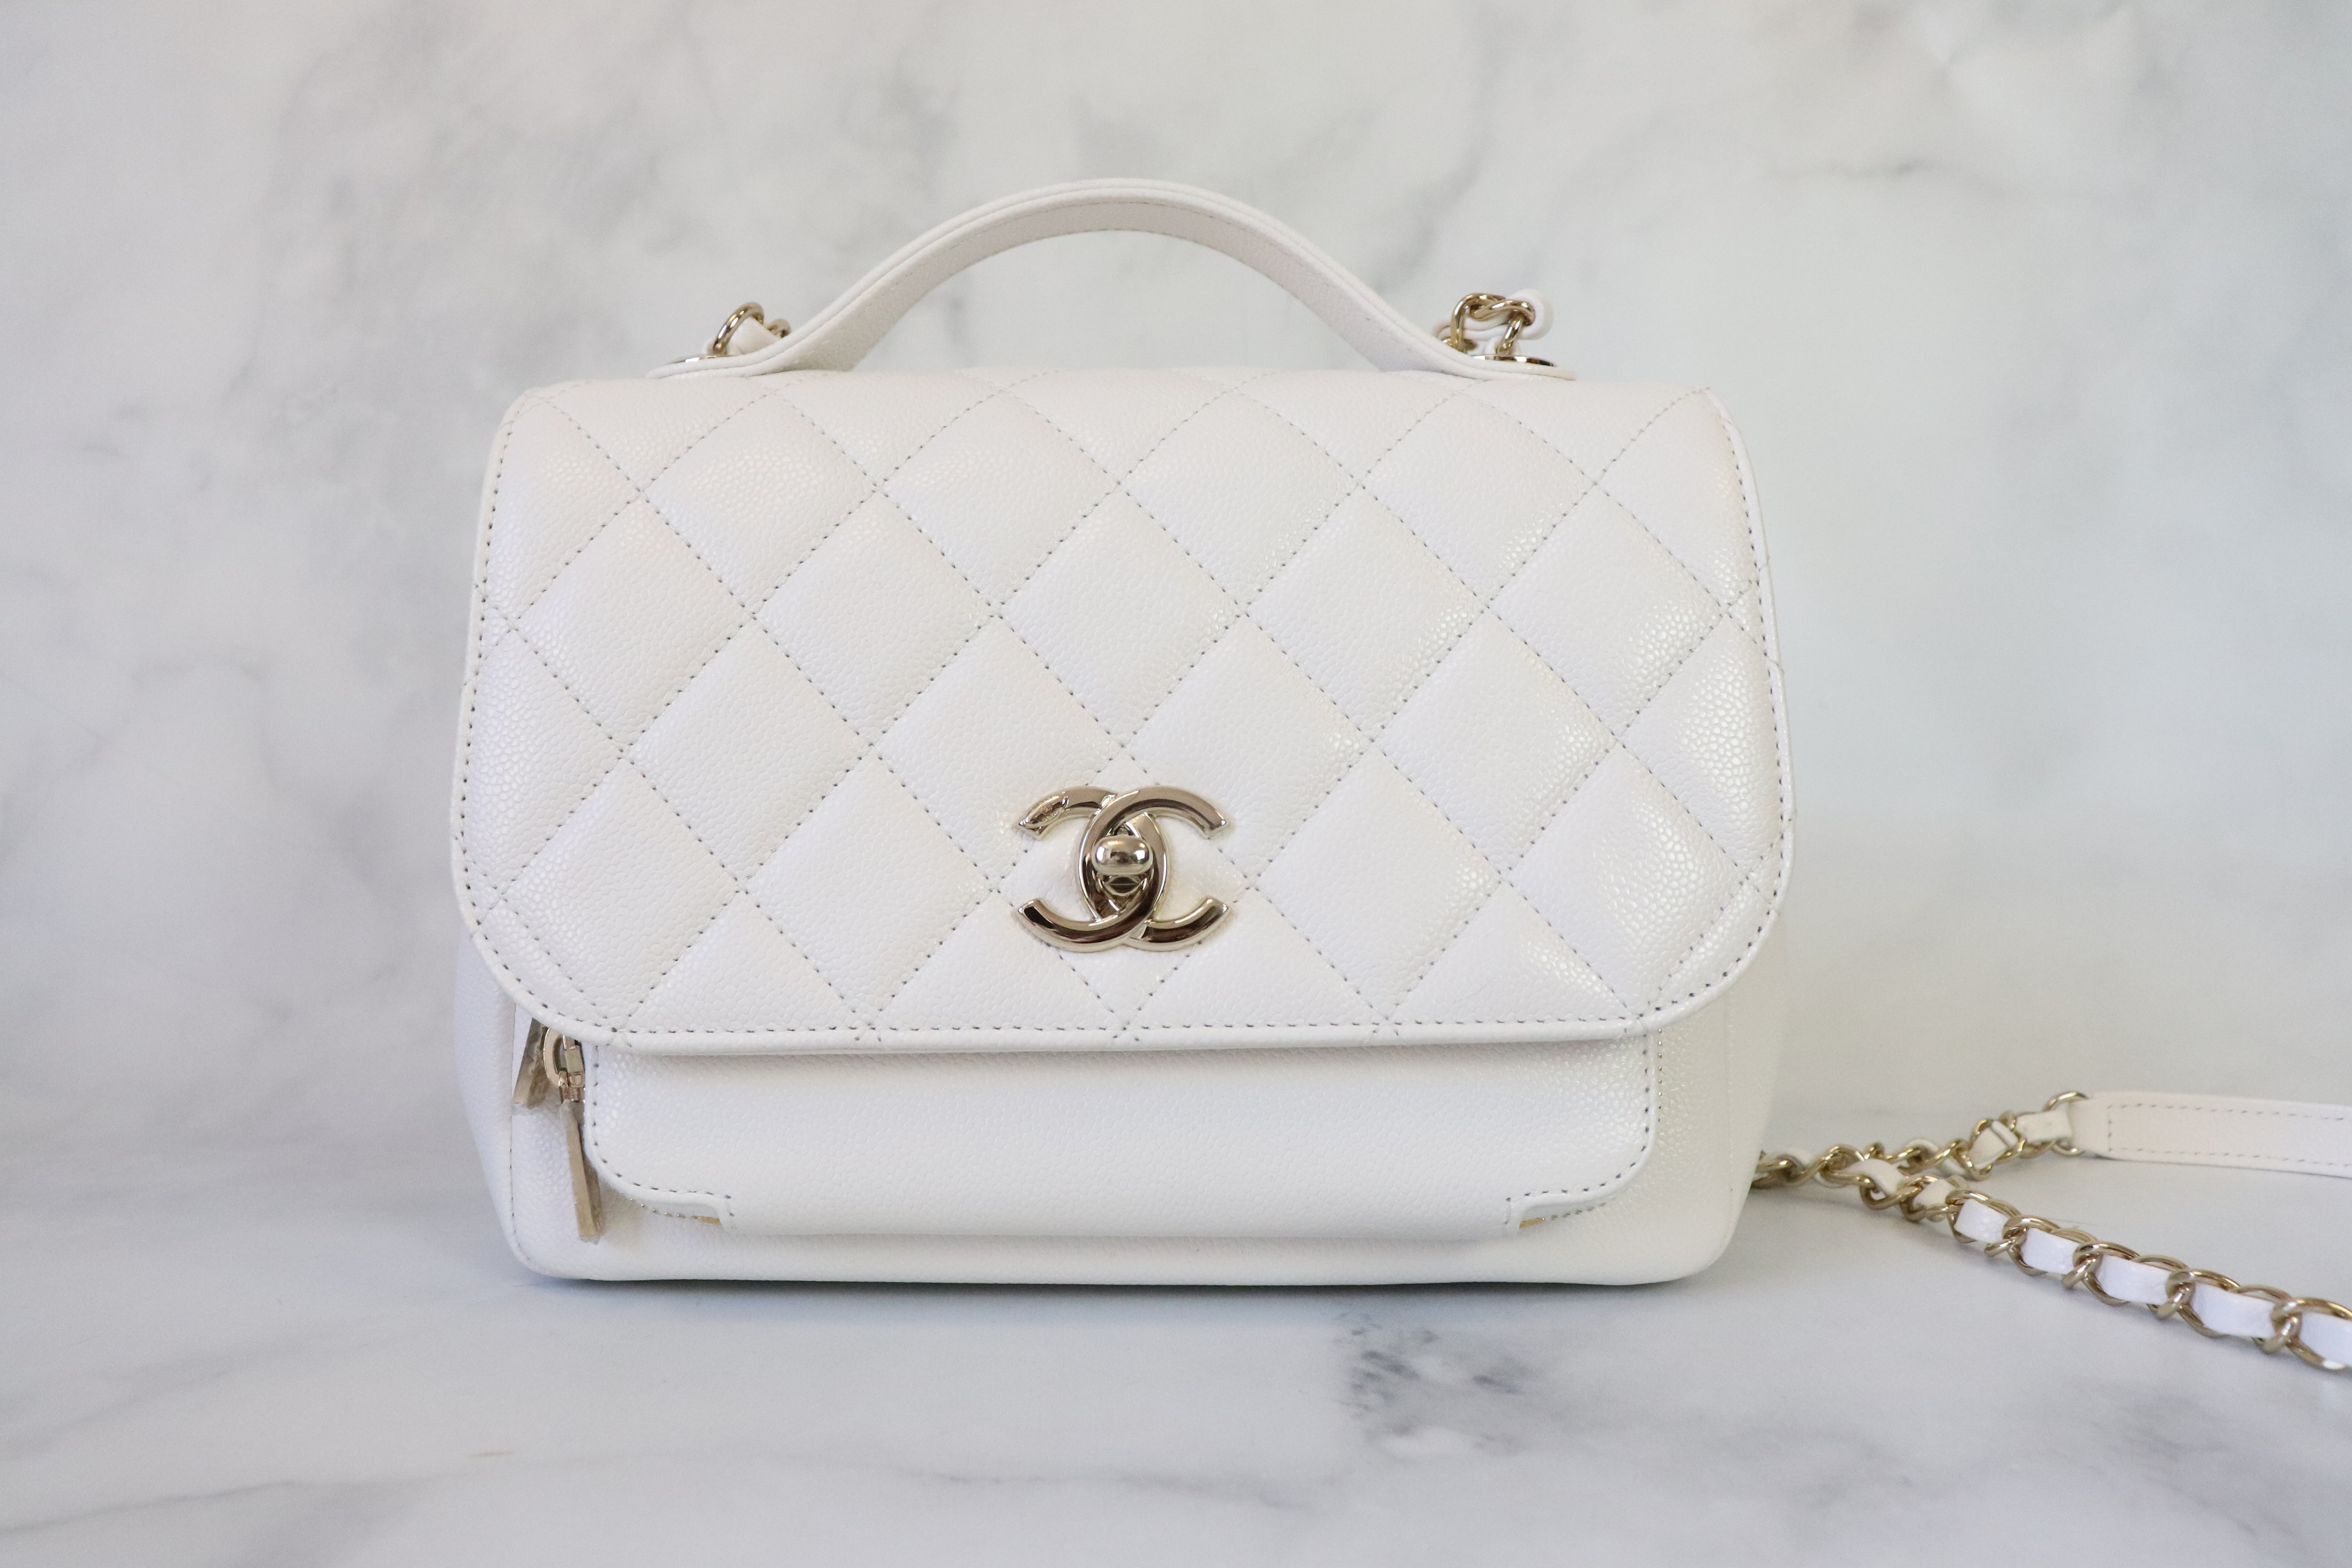 Chanel Business Affinity, Small, White Caviar Leather with Gold Hardware,  New in Box - Julia Rose Boston